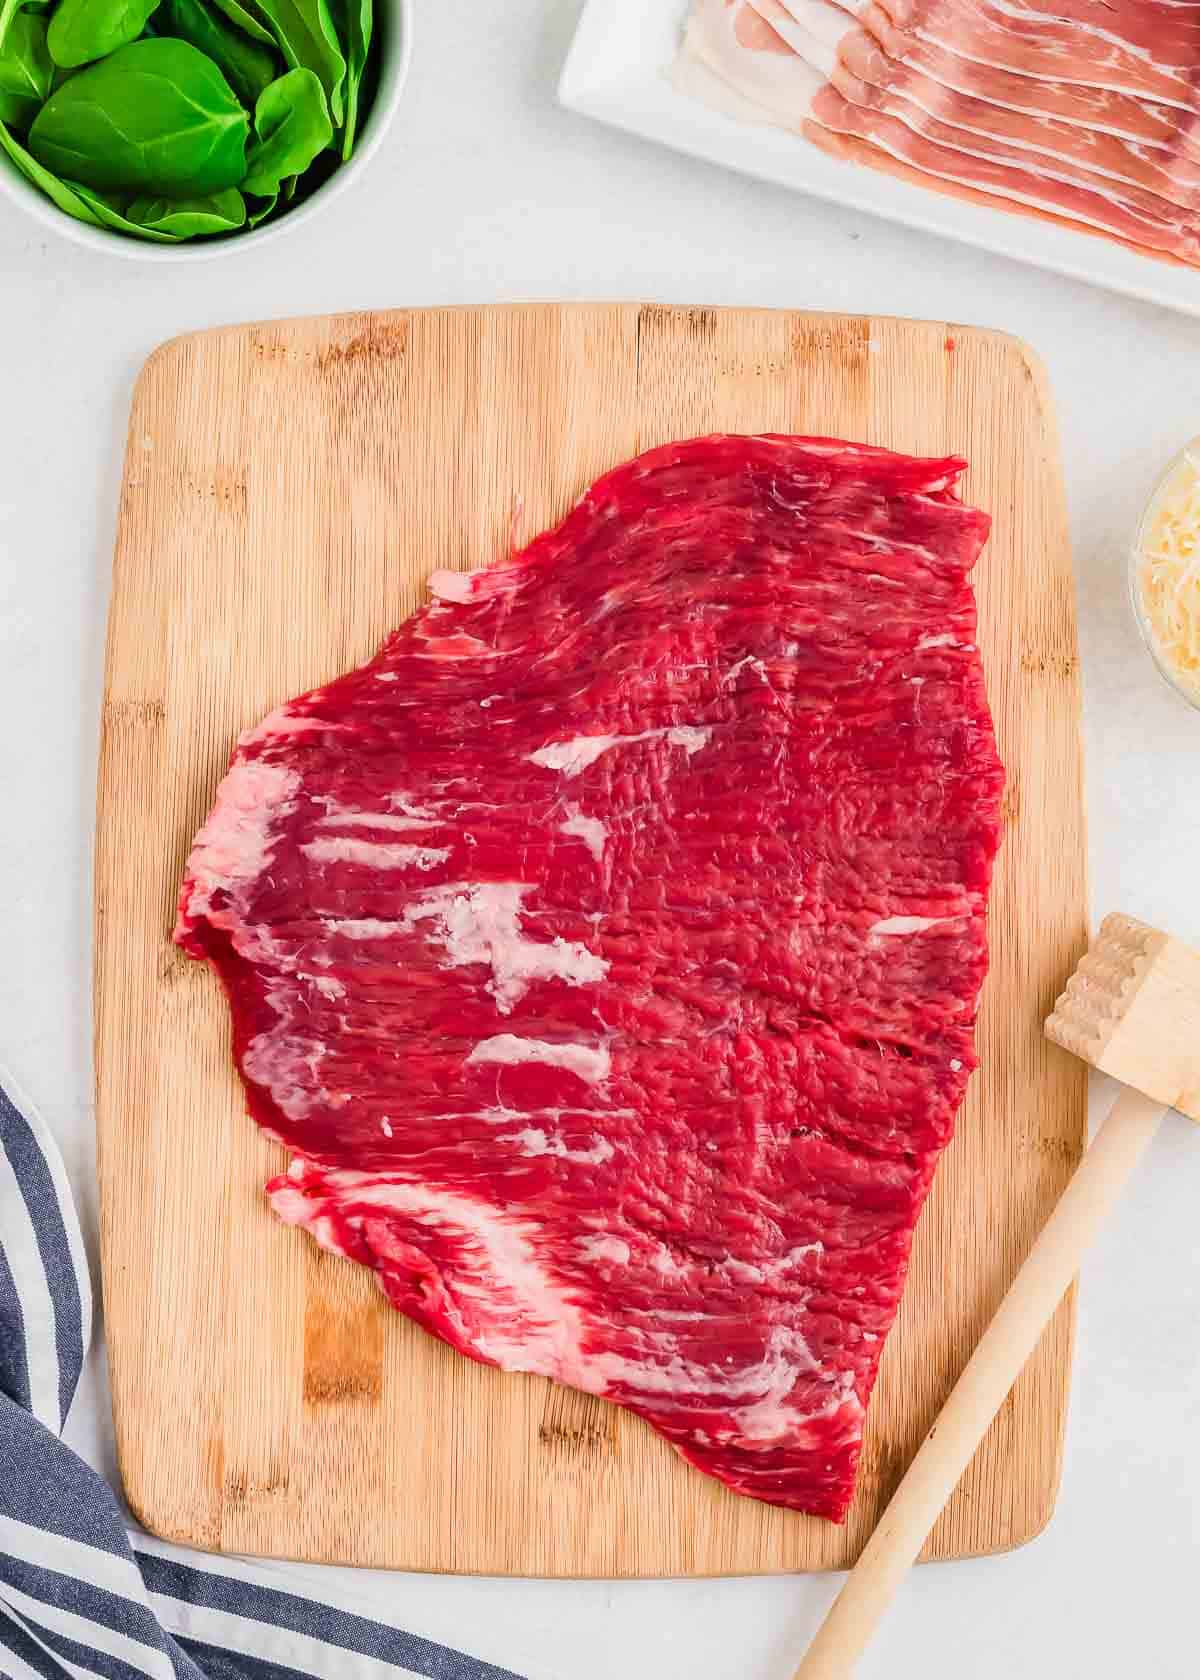 Raw flank steak on a wooden cutting board with cooking ingredients in the background.